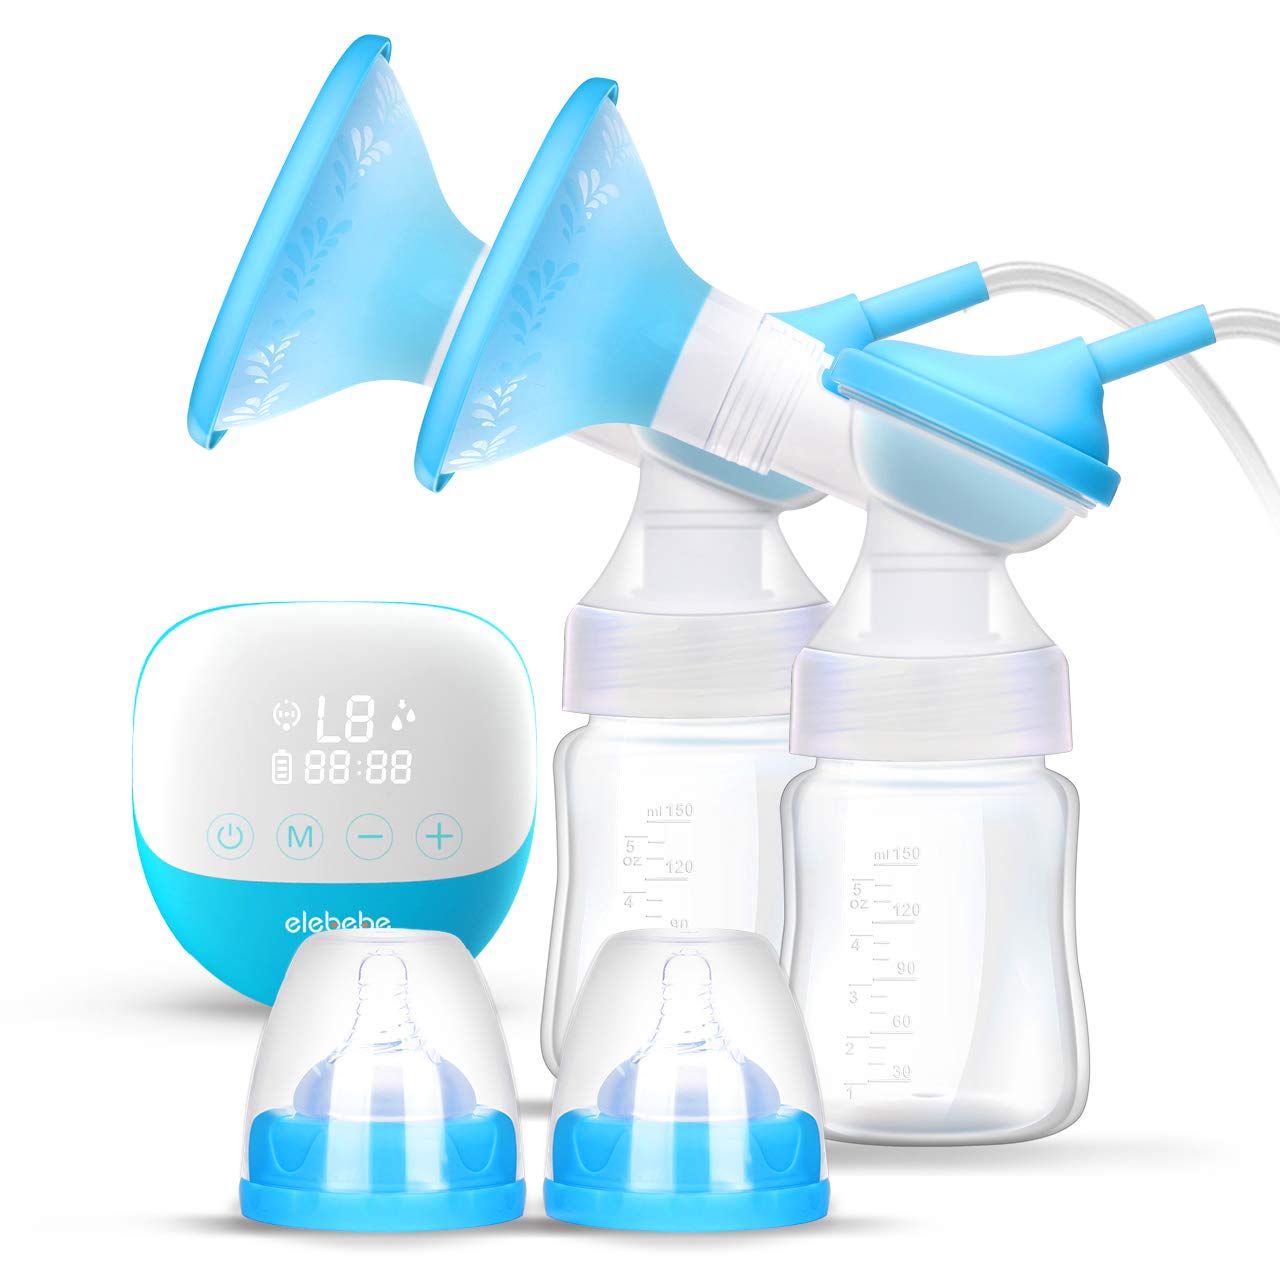 Is the breast pump necessary to buy?